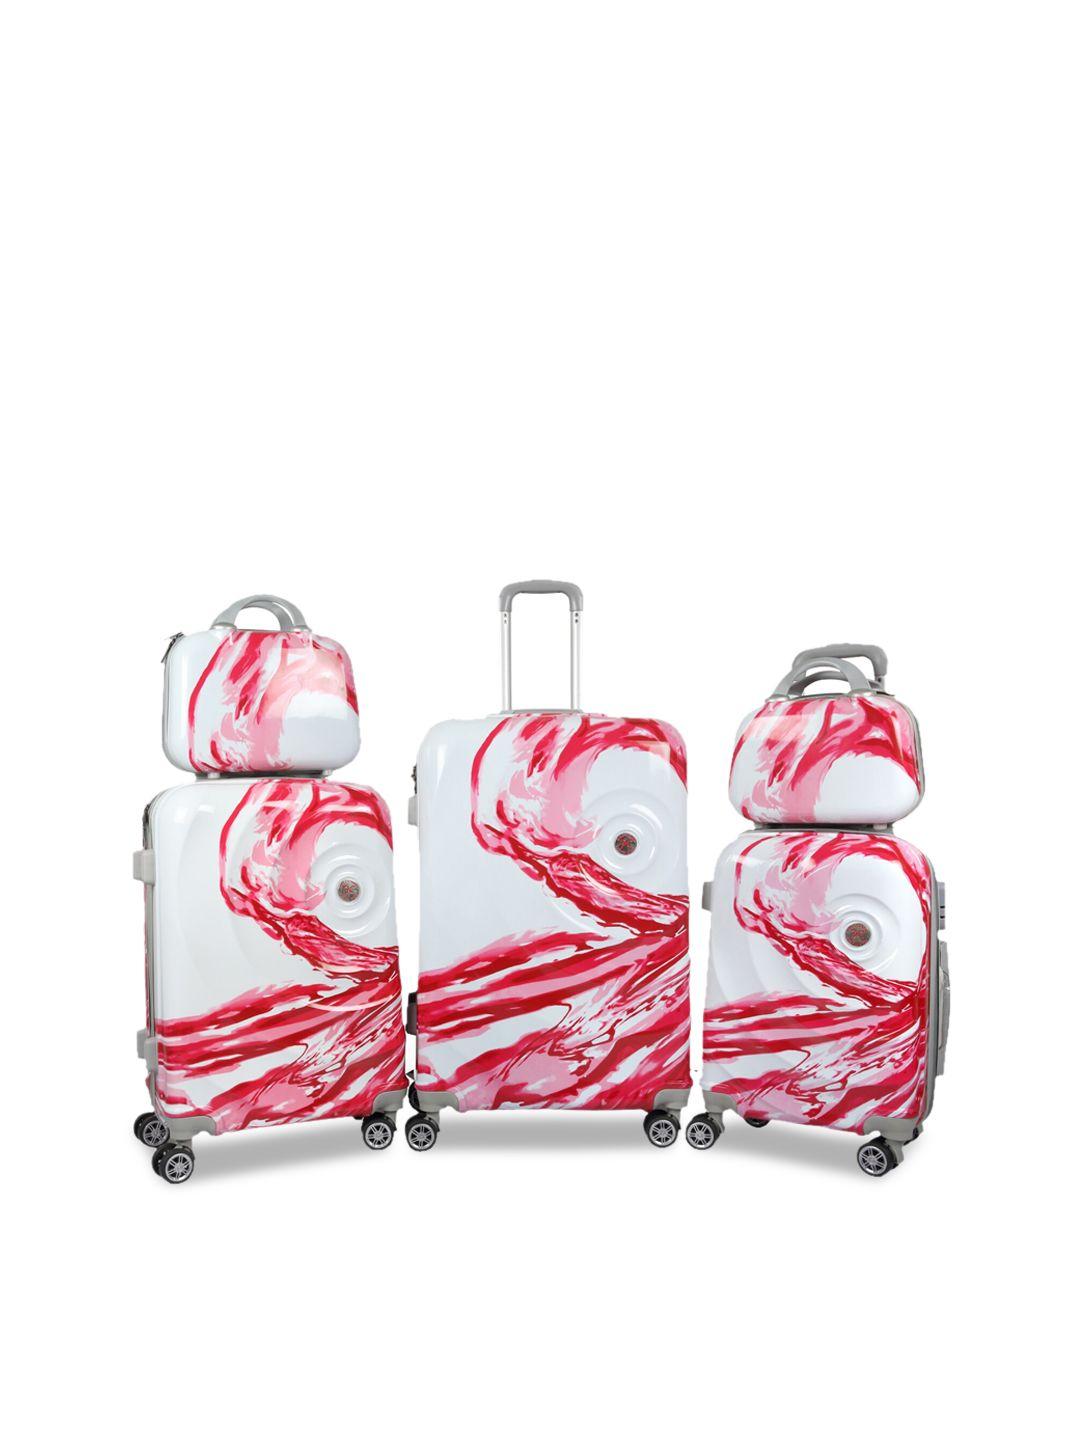 polo class unisex set of 5 pink & white printed travel bags